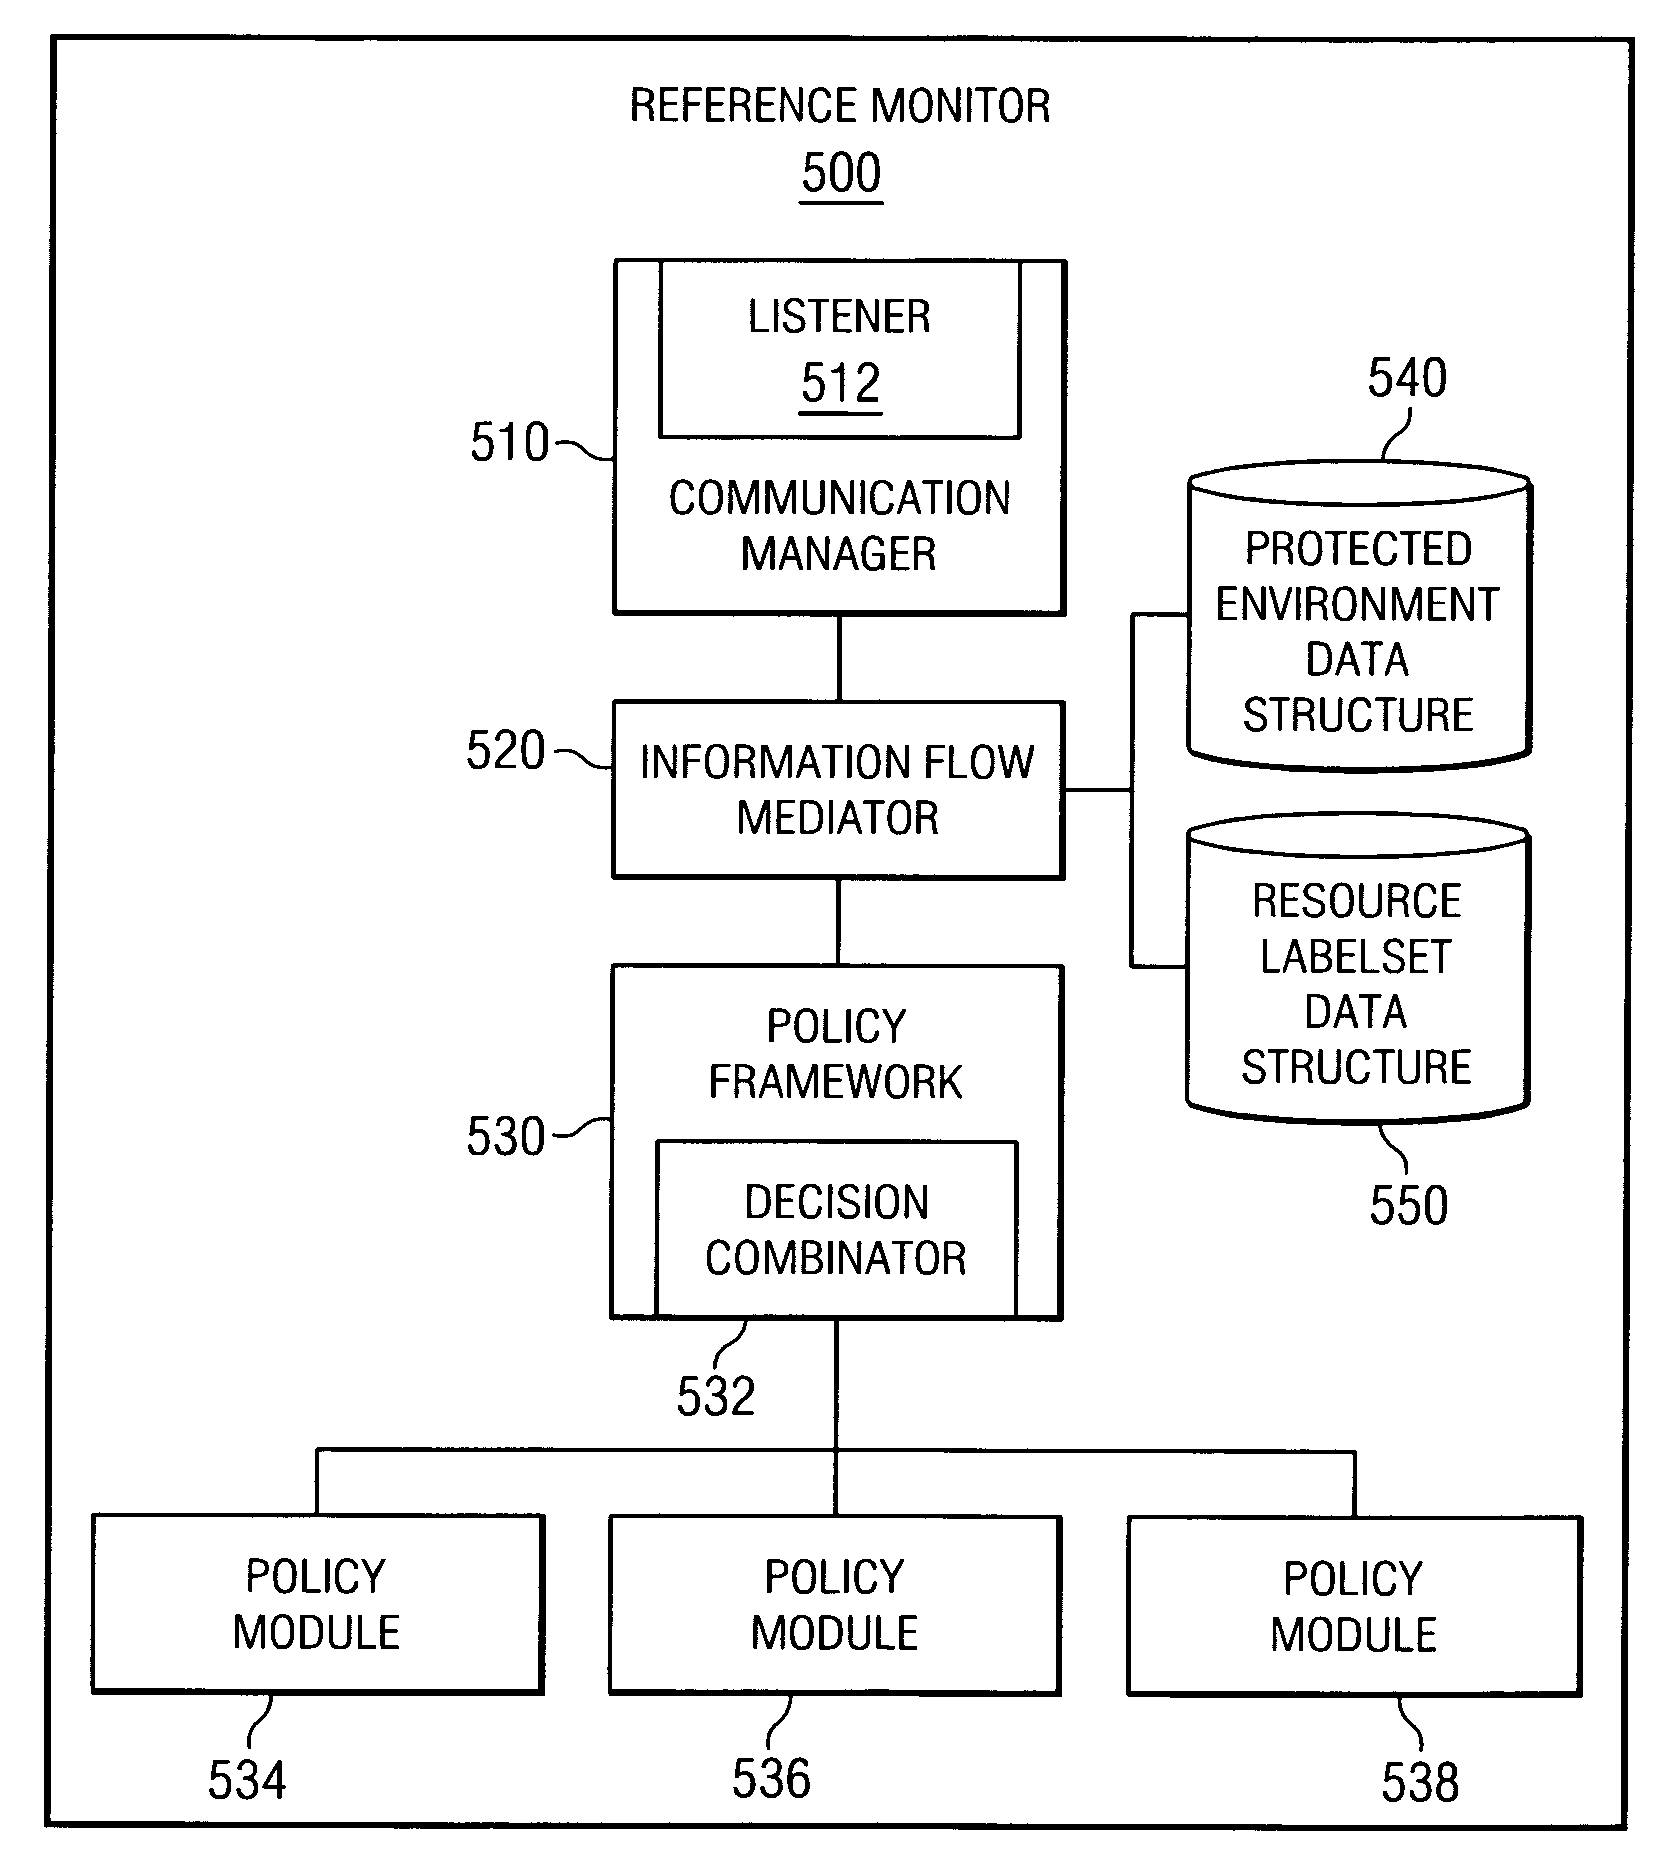 Reference monitor method for enforcing information flow policies